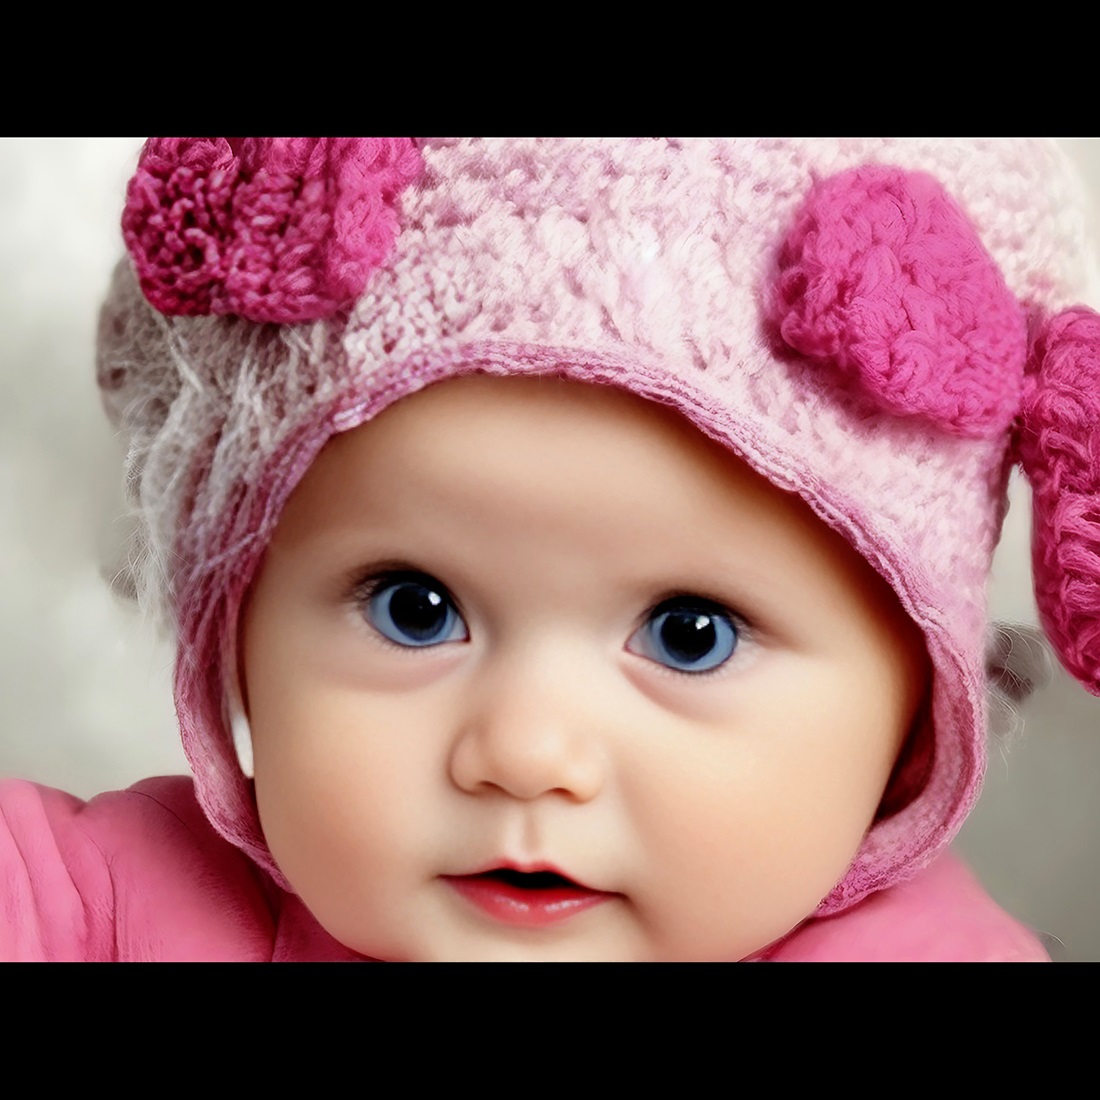 Portrait Of Adorable Baby Girl Wearing Pink Dress v2 cover image.